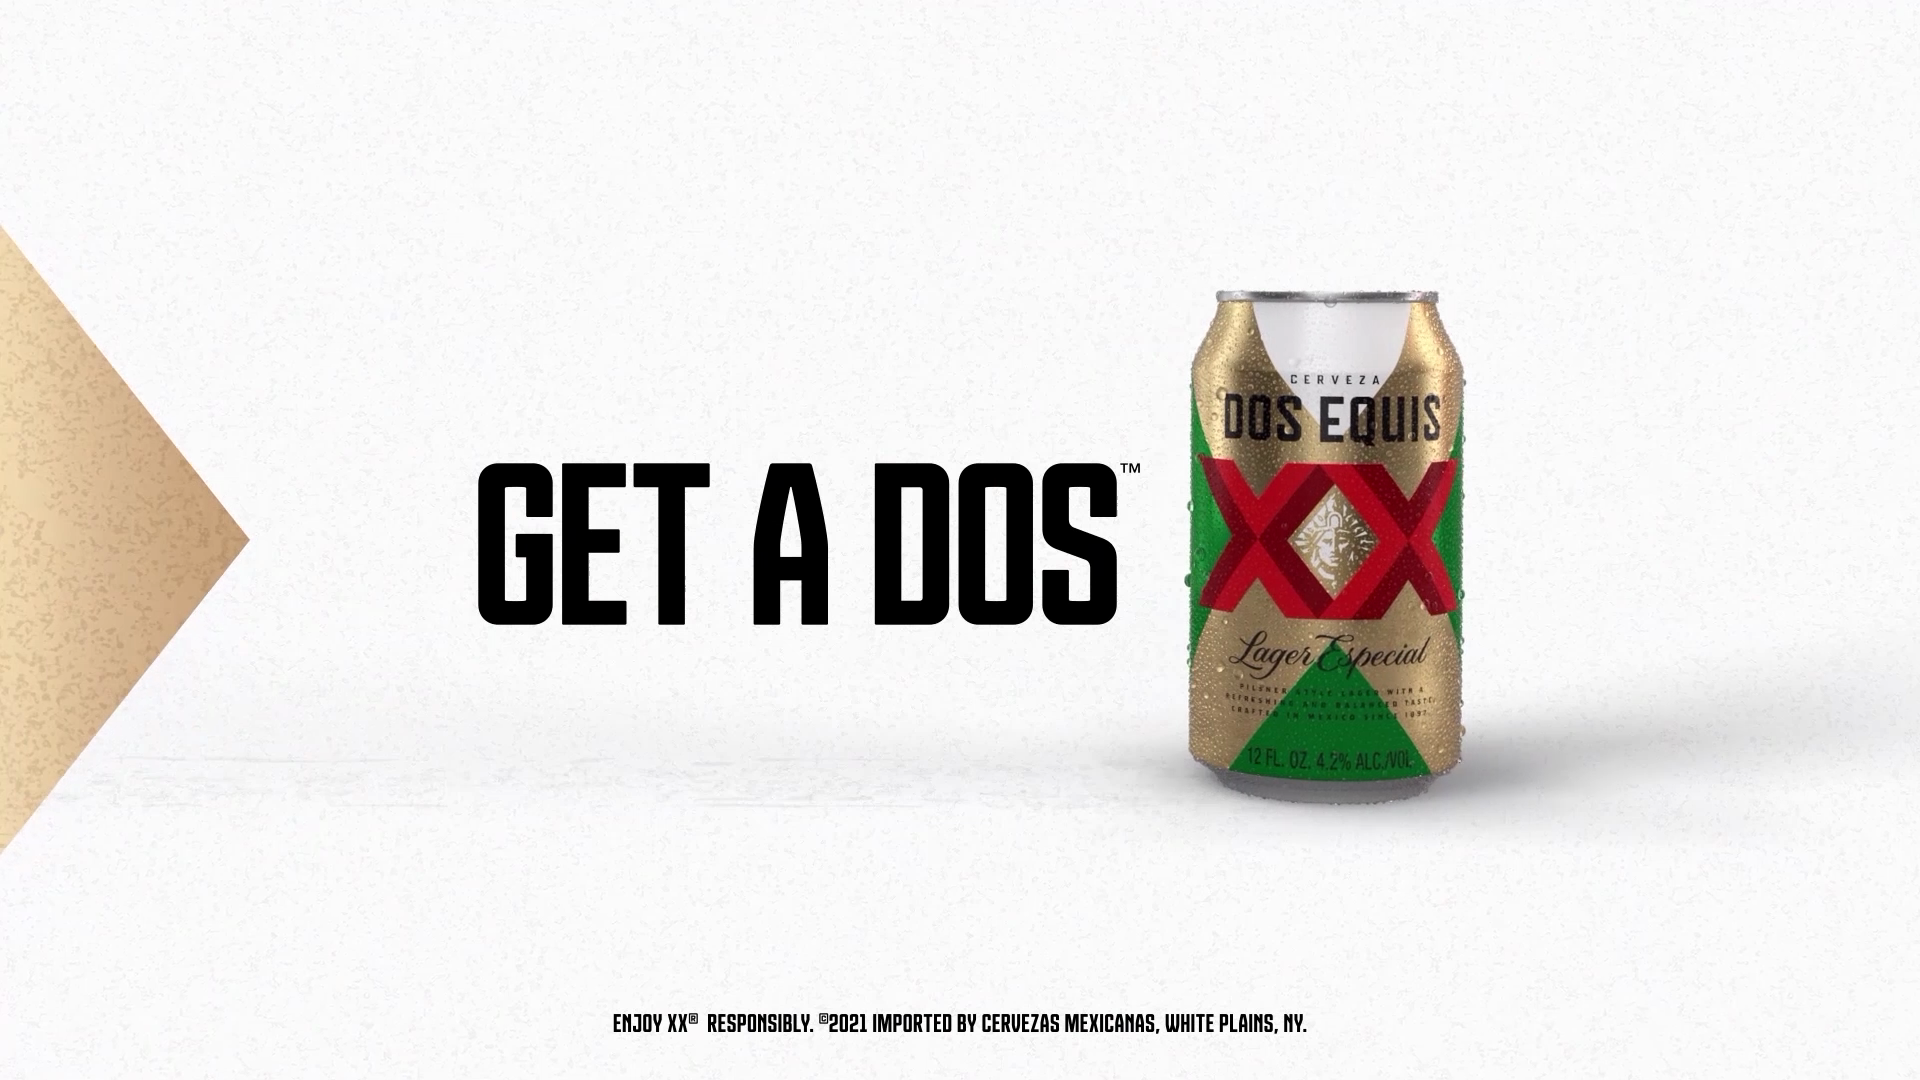 Dos Equis: College Football sizzle video